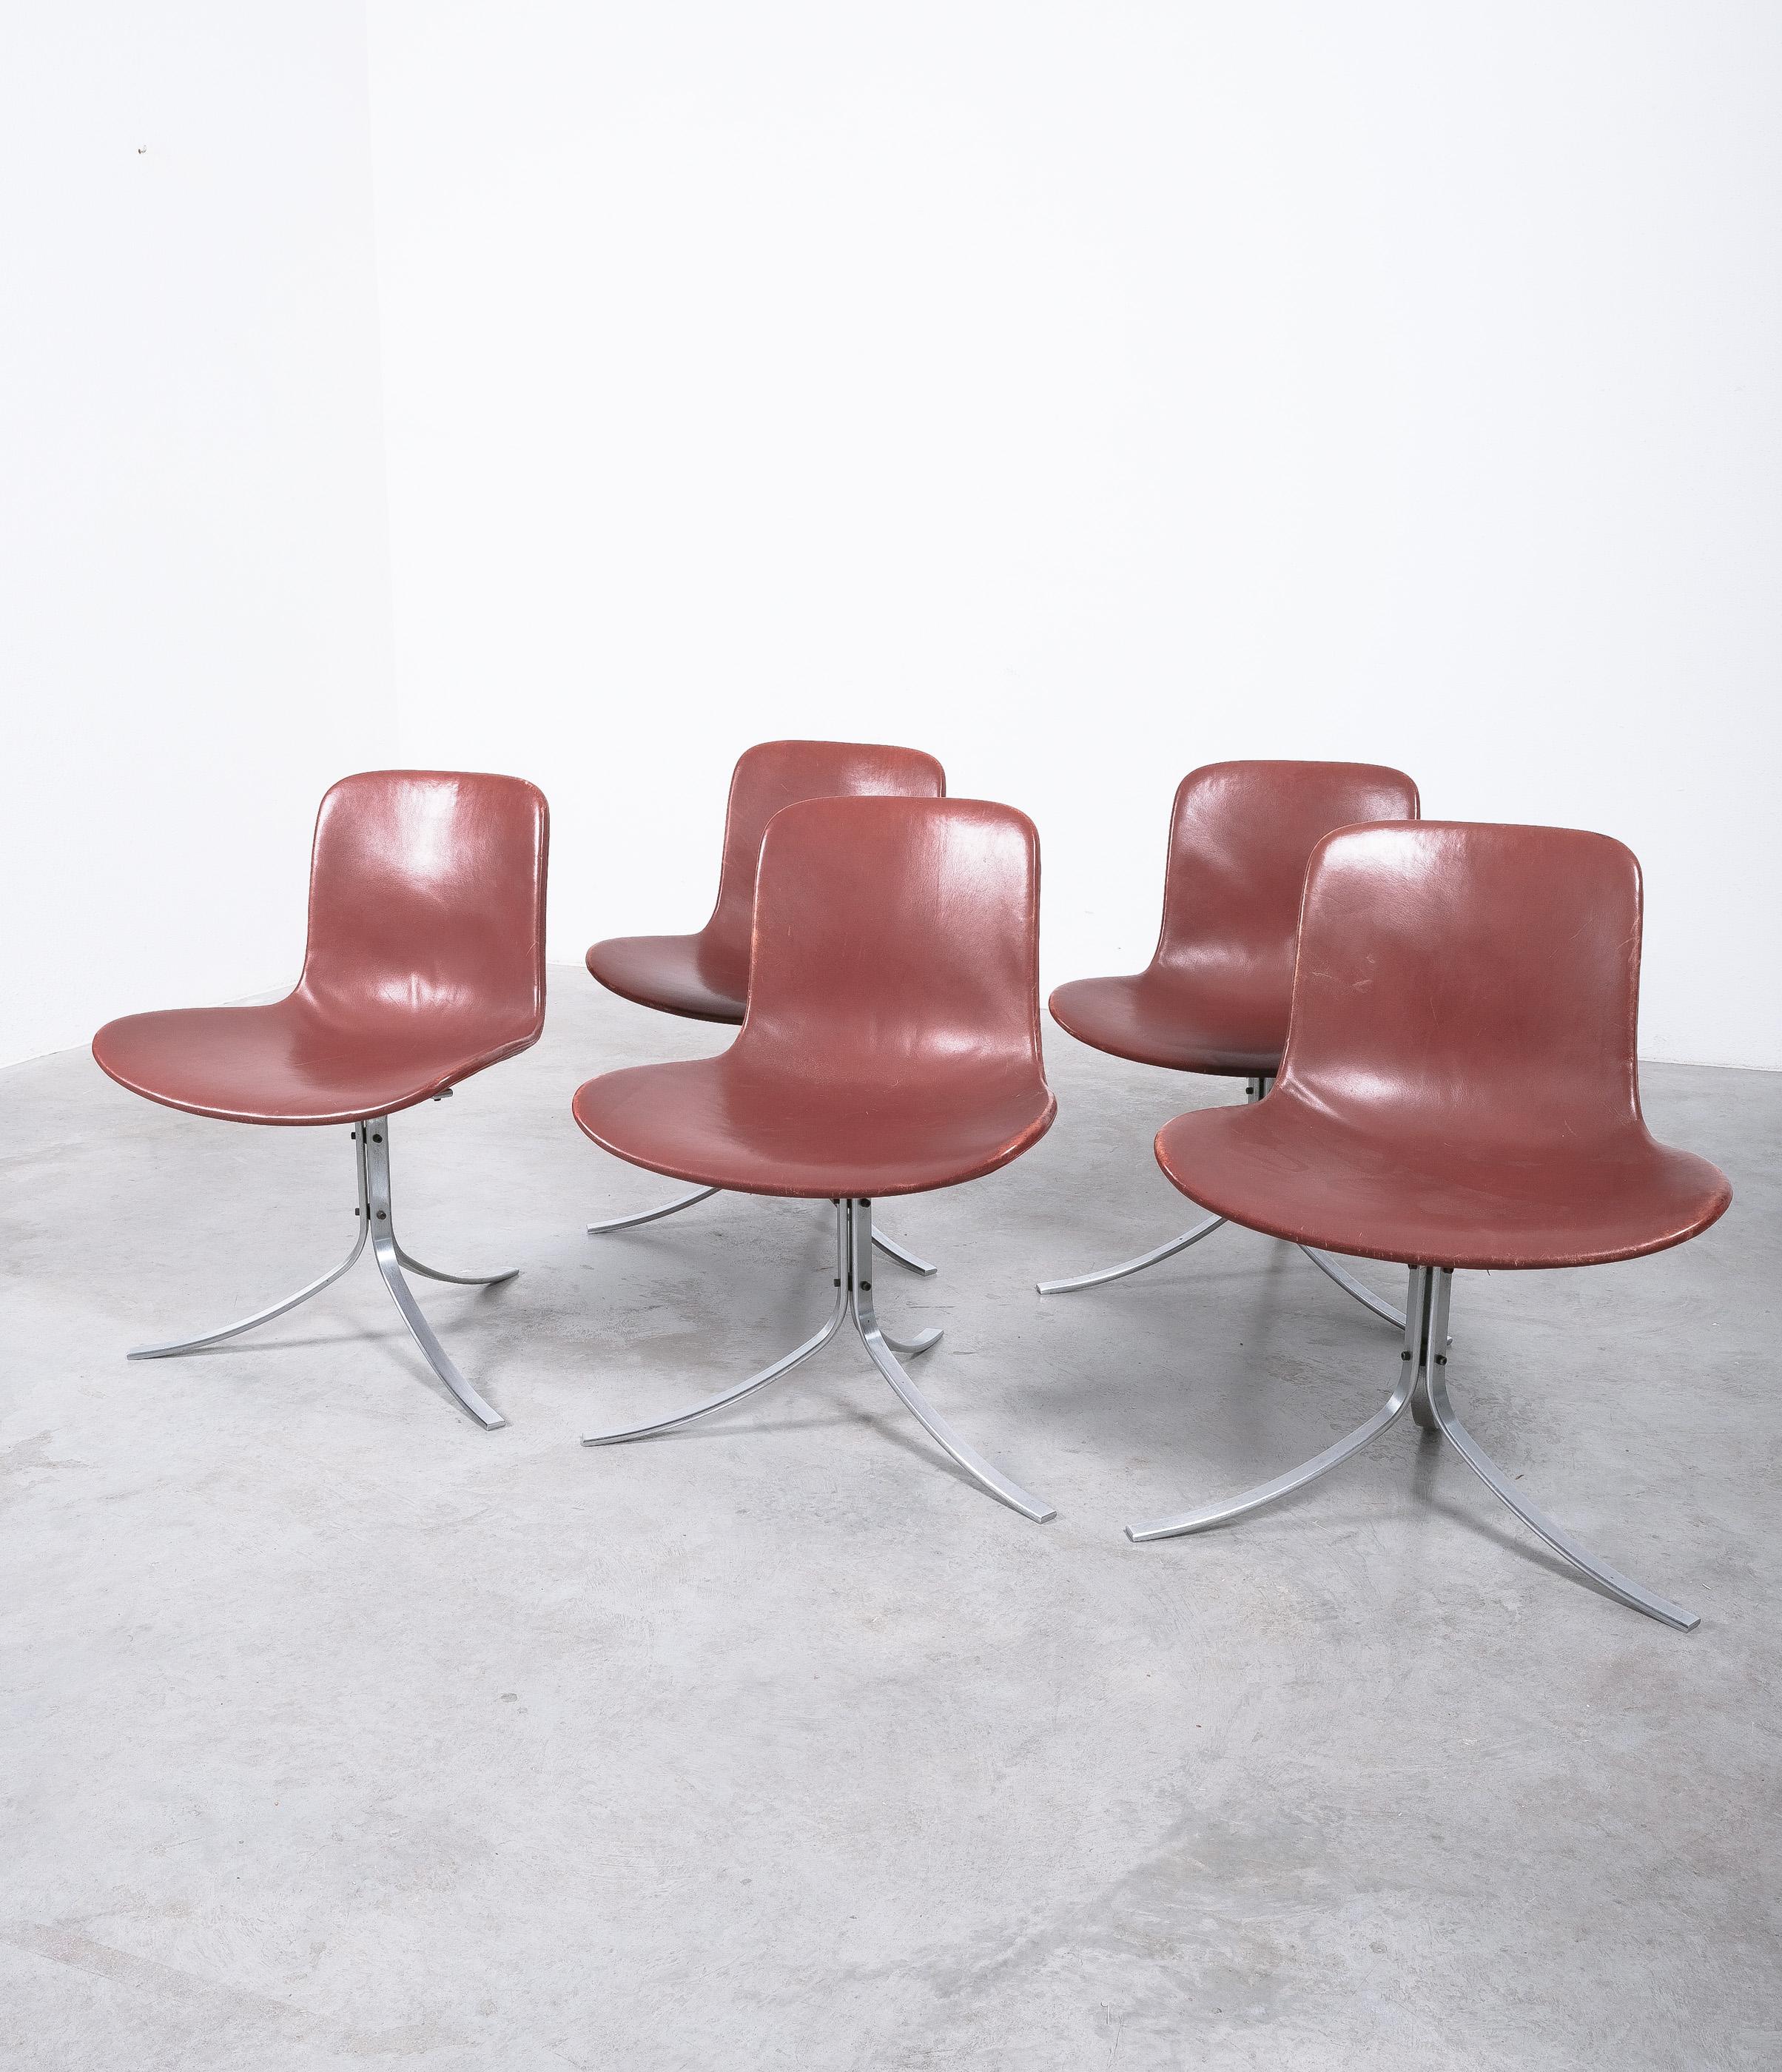 Mid-20th Century Poul Kjærholm PK-9 Dining Chairs by E. Kold Christensen Brown Leather, Denmark For Sale